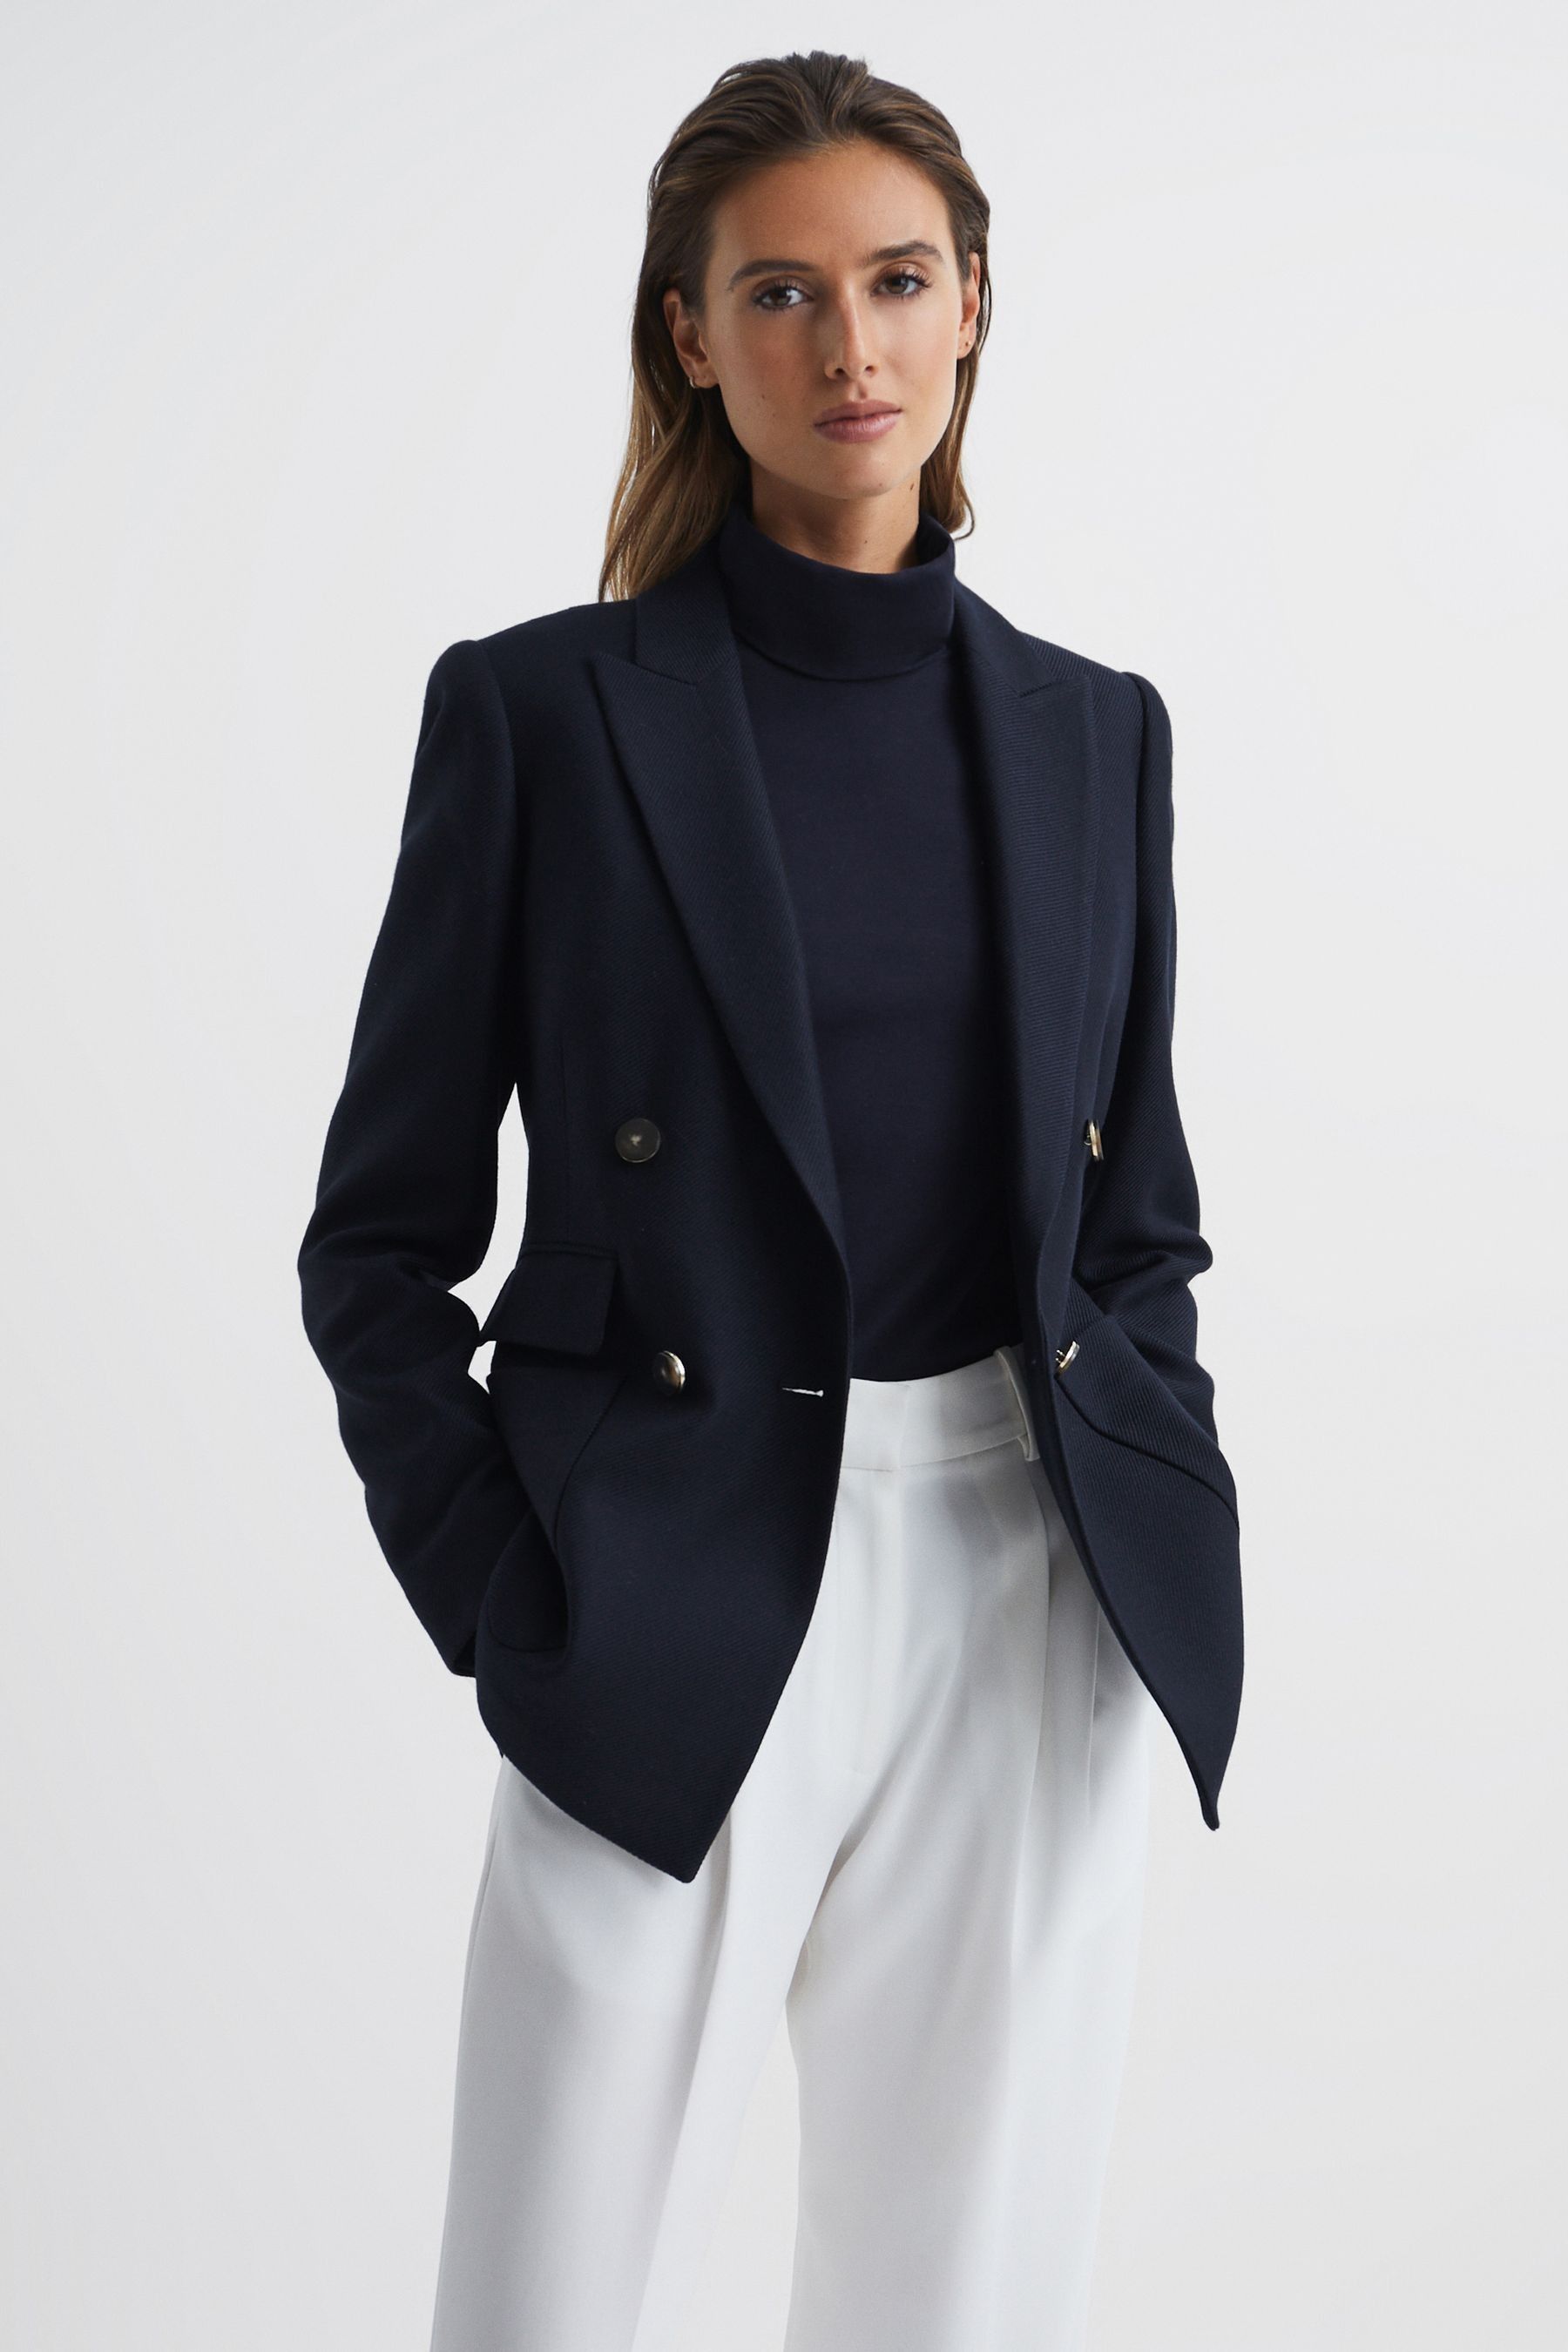 REISS LARSSON - NAVY DOUBLE BREASTED TWILL BLAZER, US 4